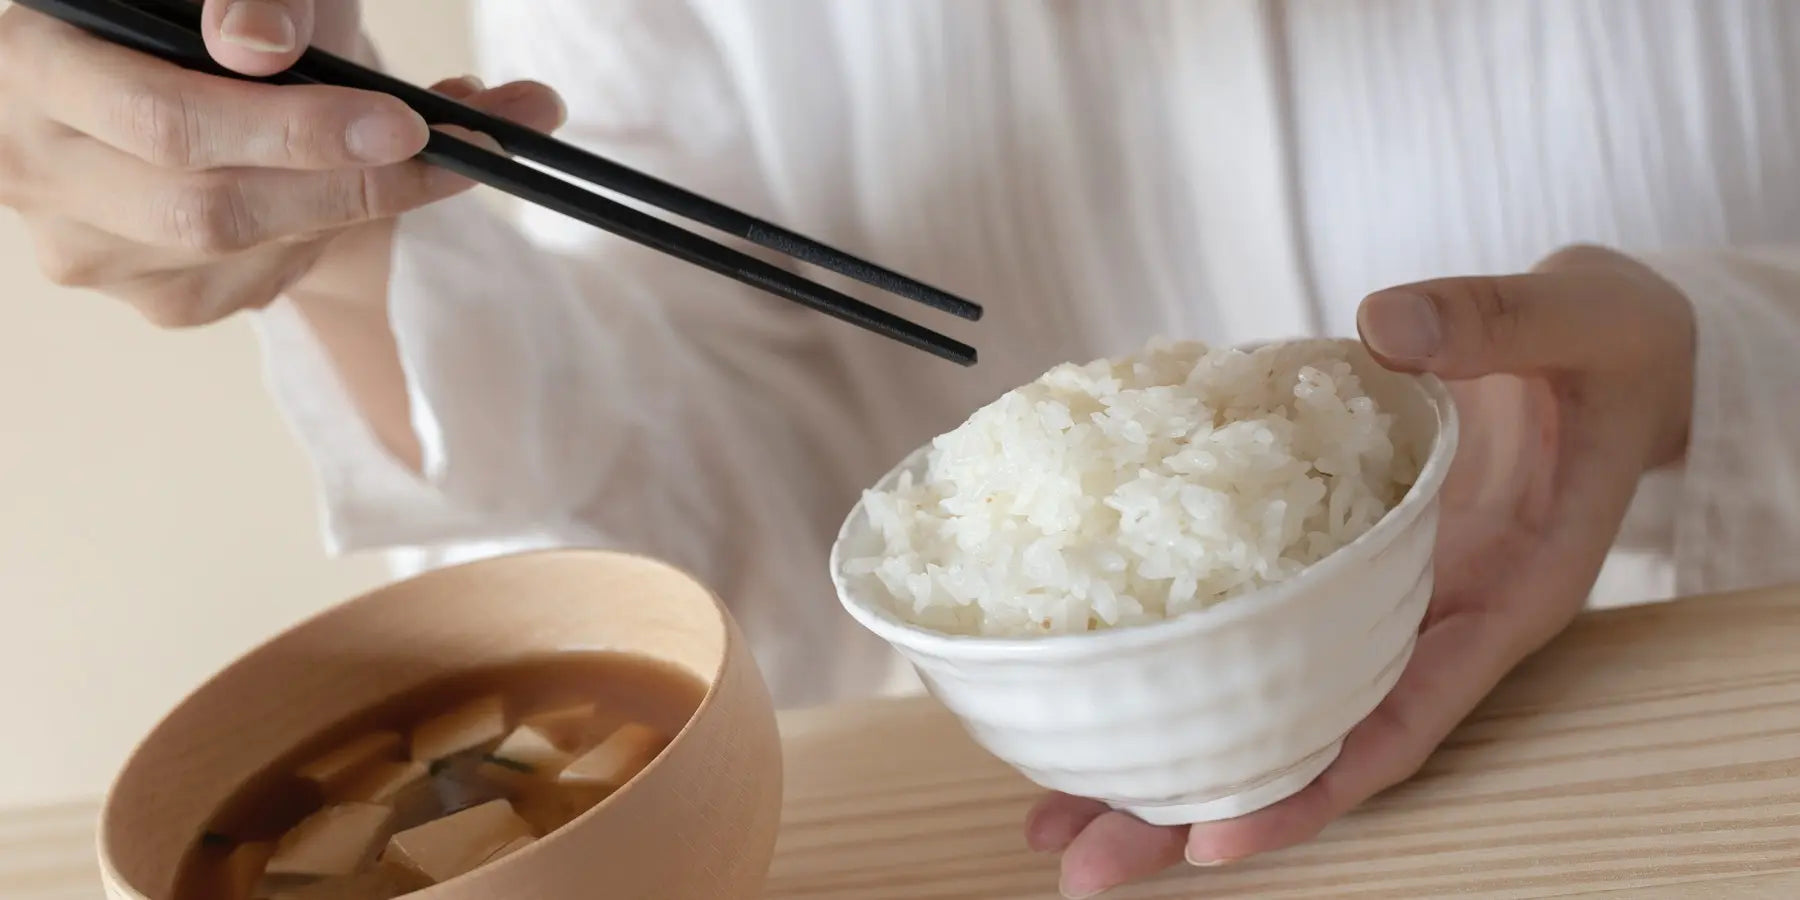 Discover our great selection of Rice Bowls at Globalkitchen Japan.